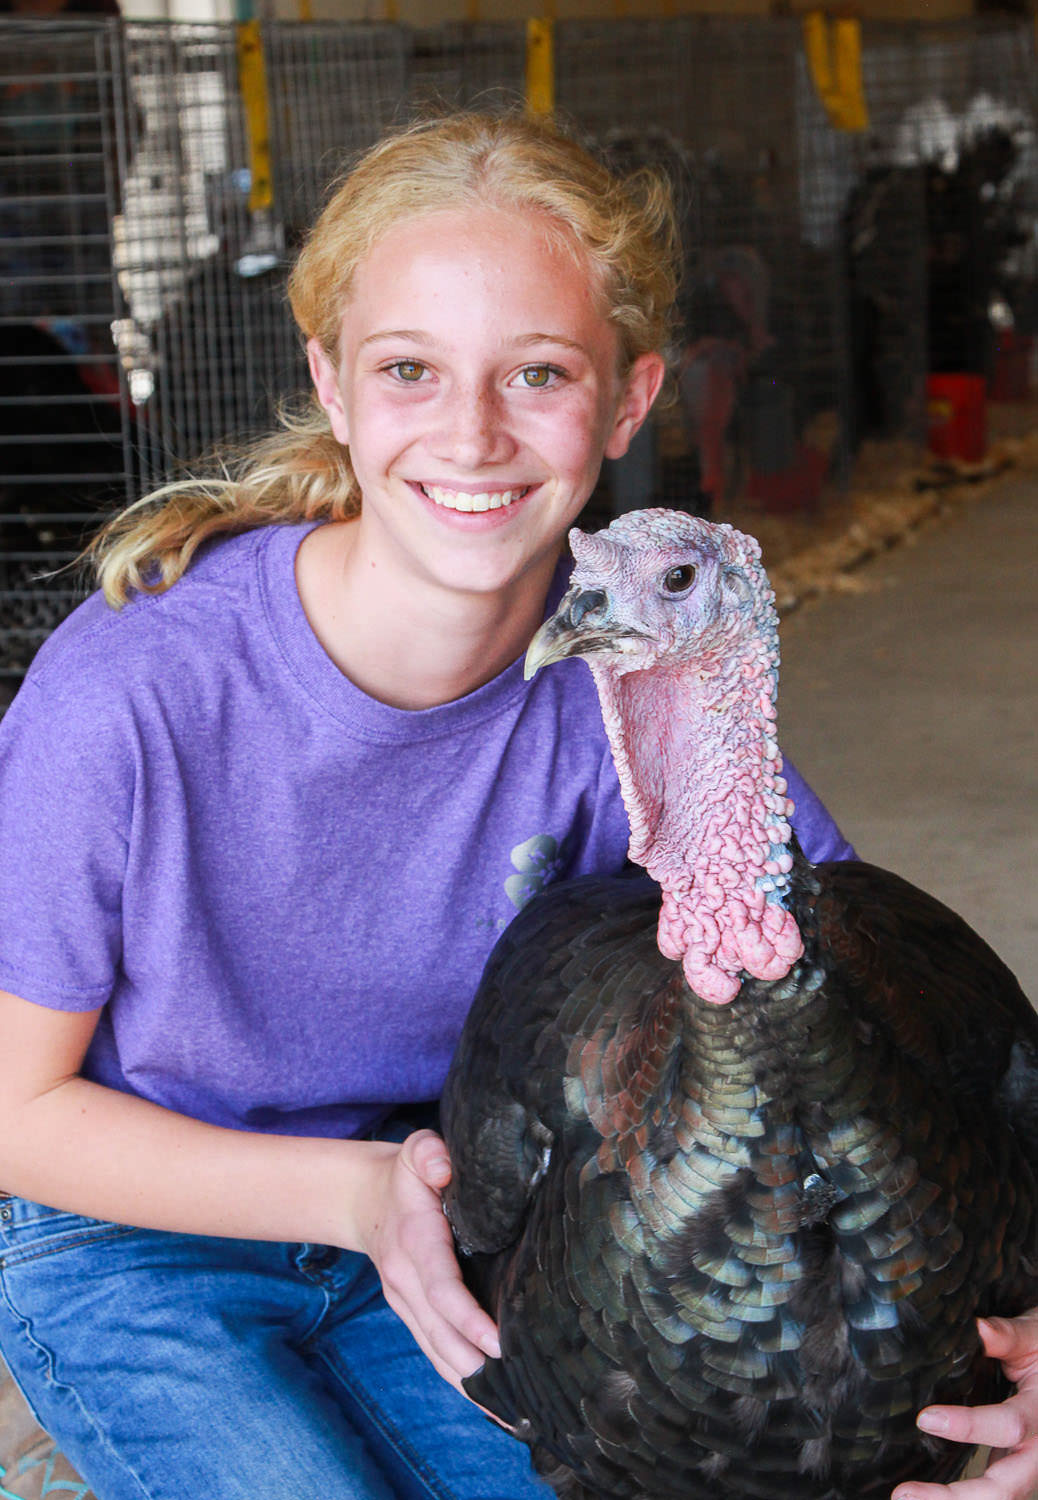 Girl and Turkey